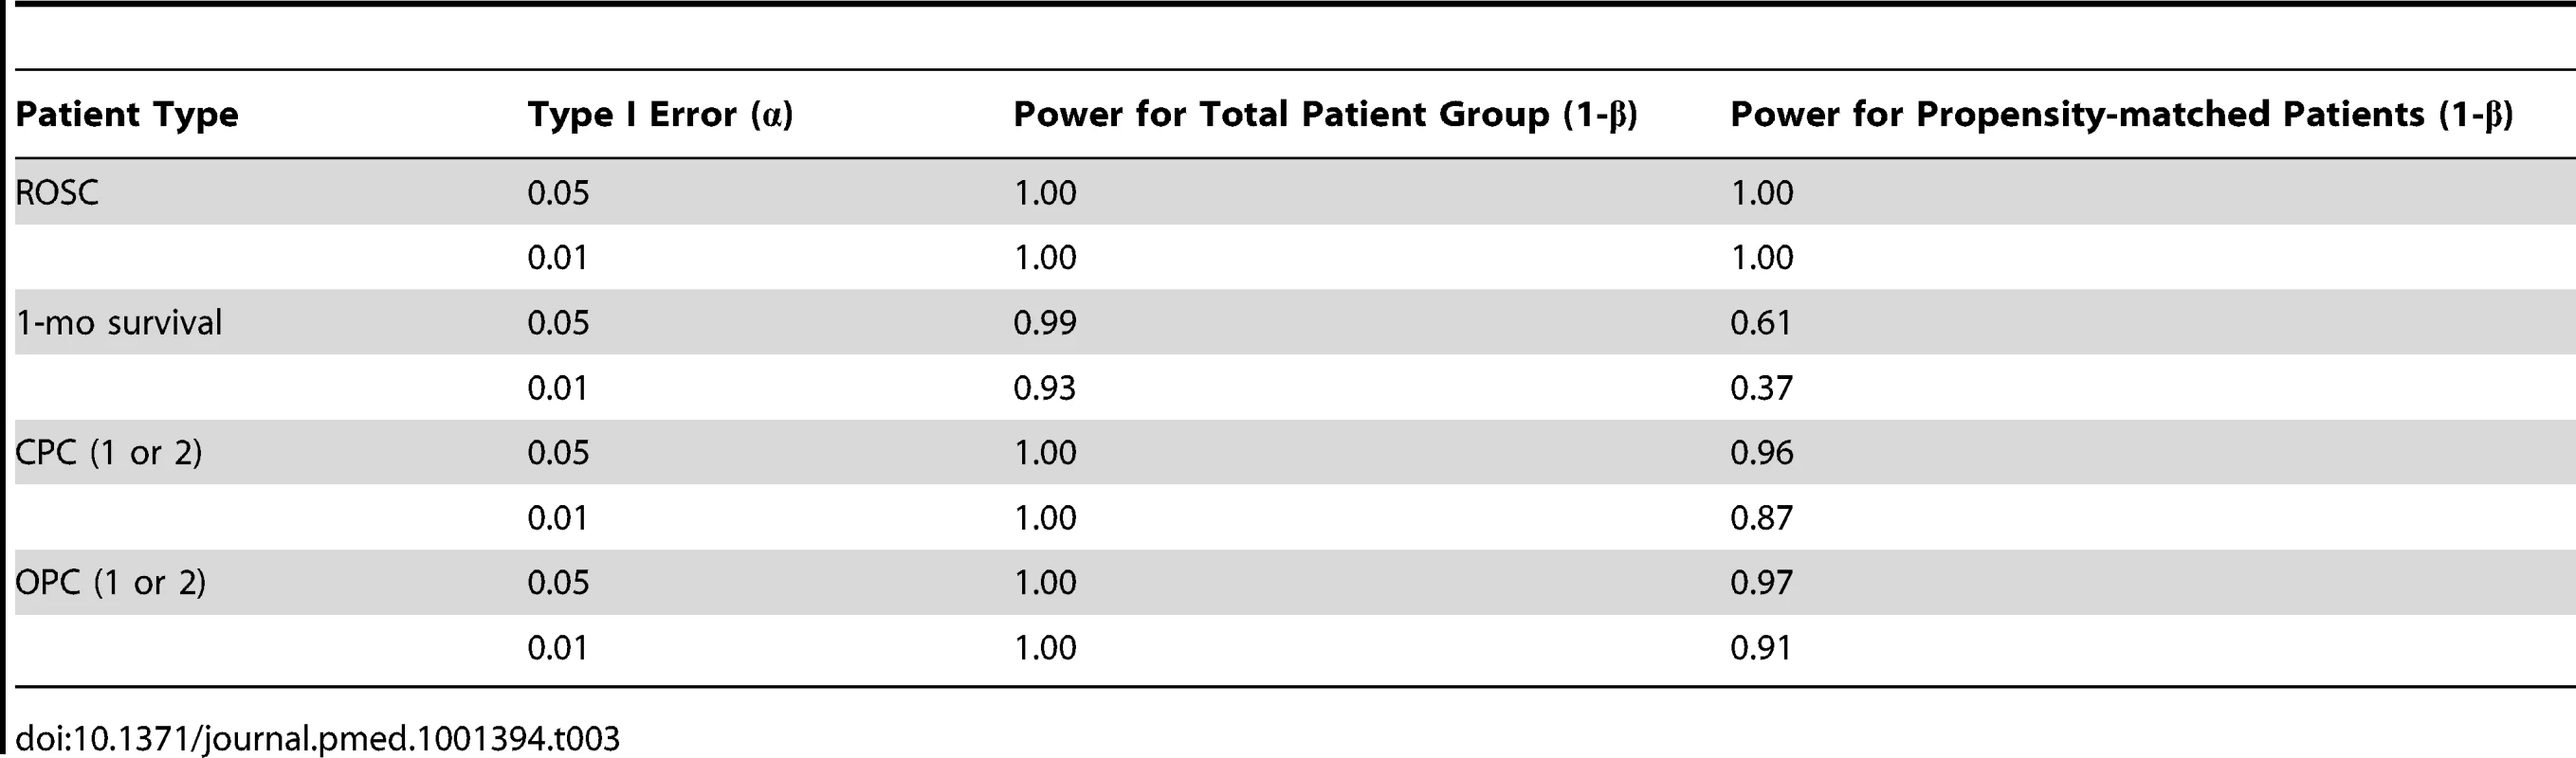 Results of power calculations for all patients and propensity-matched patients.